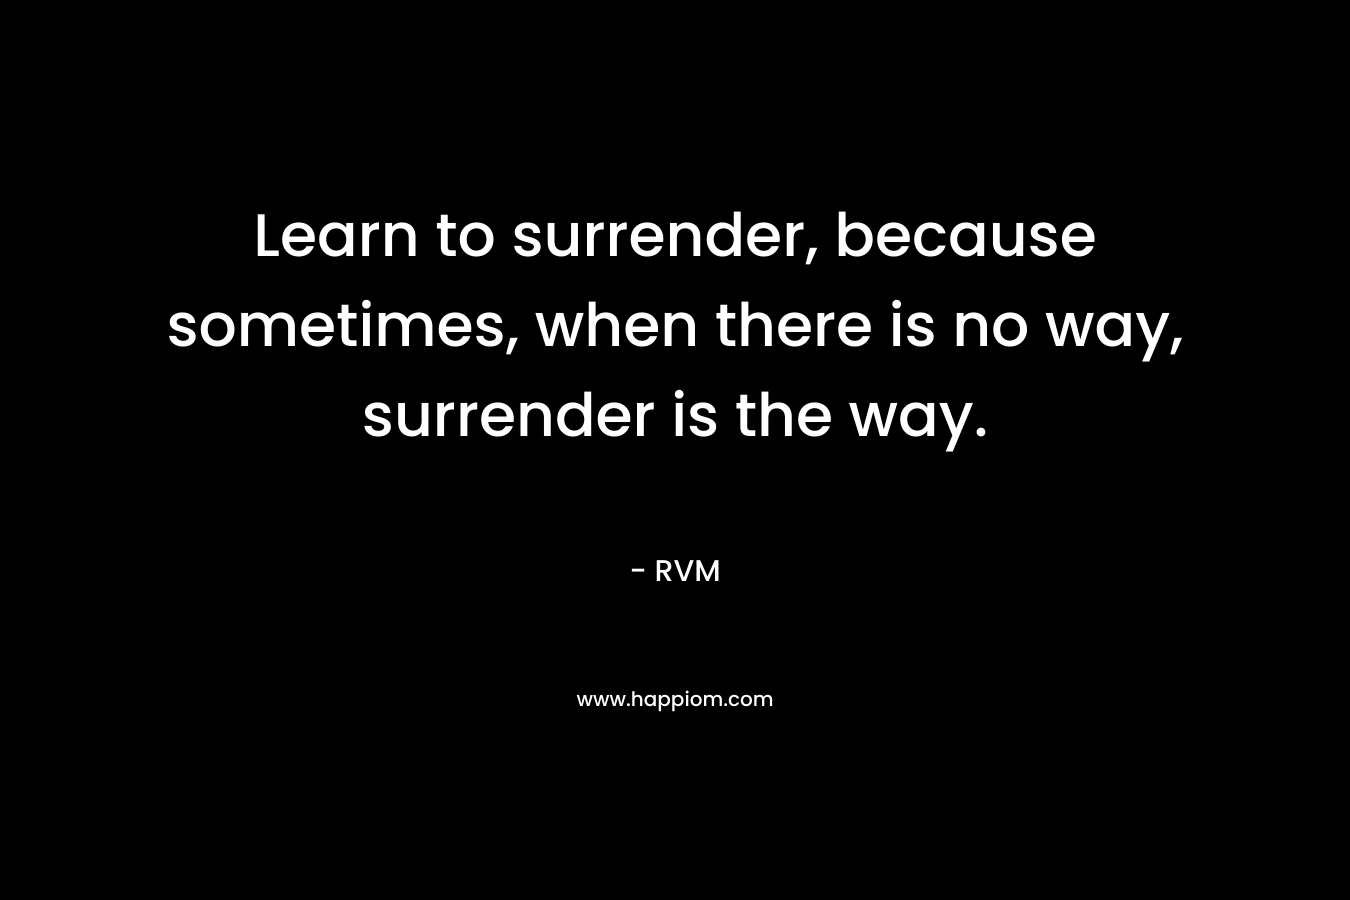 Learn to surrender, because sometimes, when there is no way, surrender is the way.